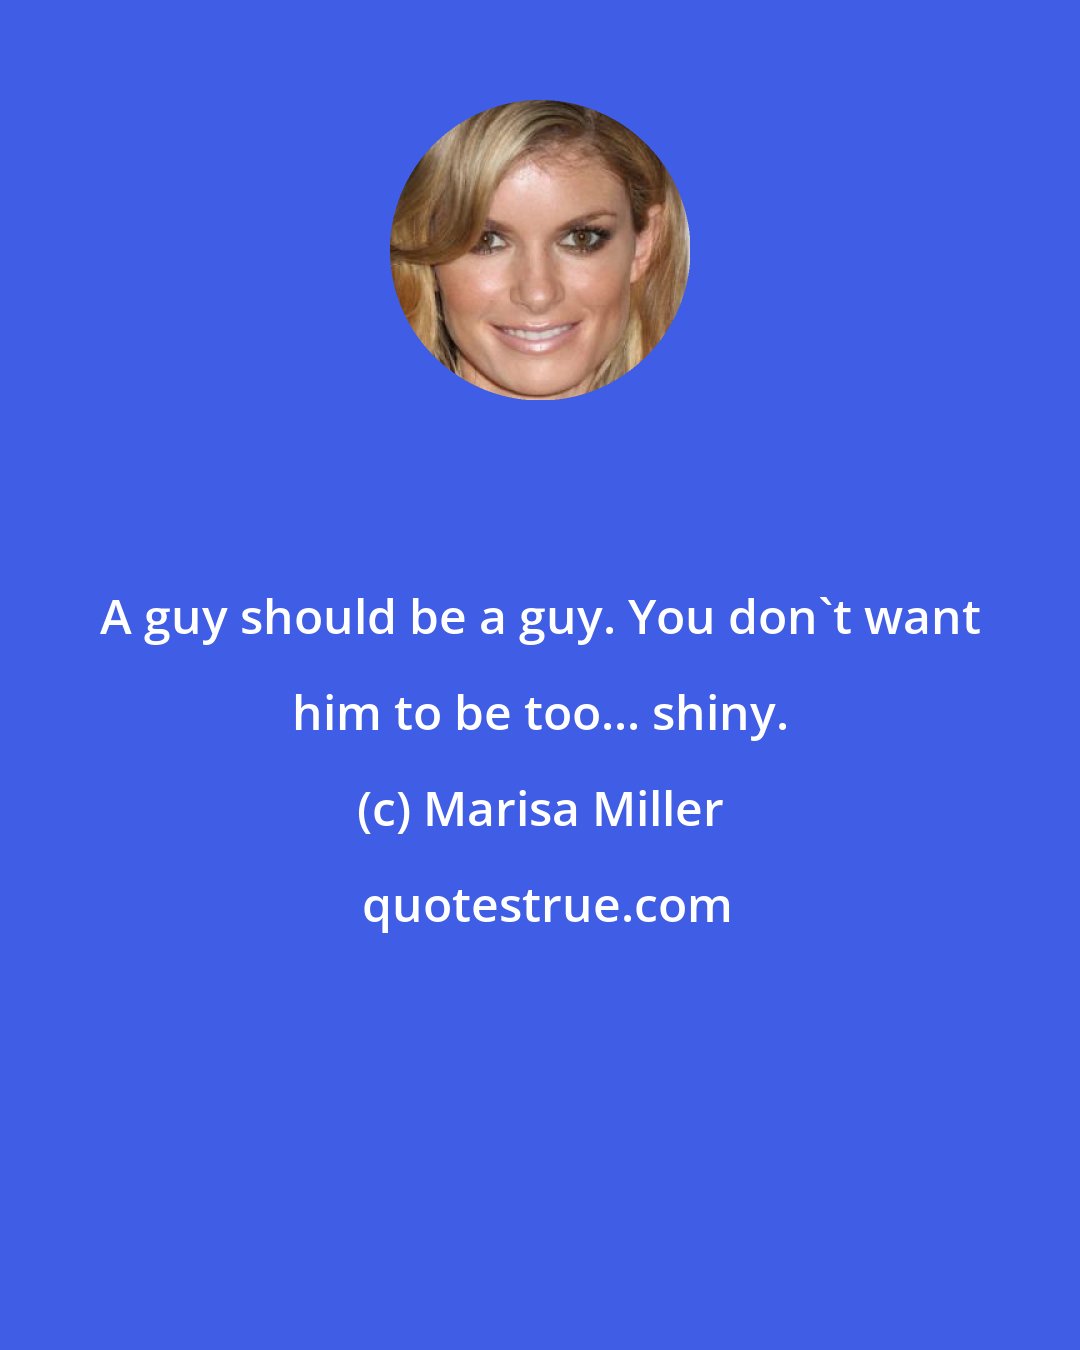 Marisa Miller: A guy should be a guy. You don't want him to be too... shiny.